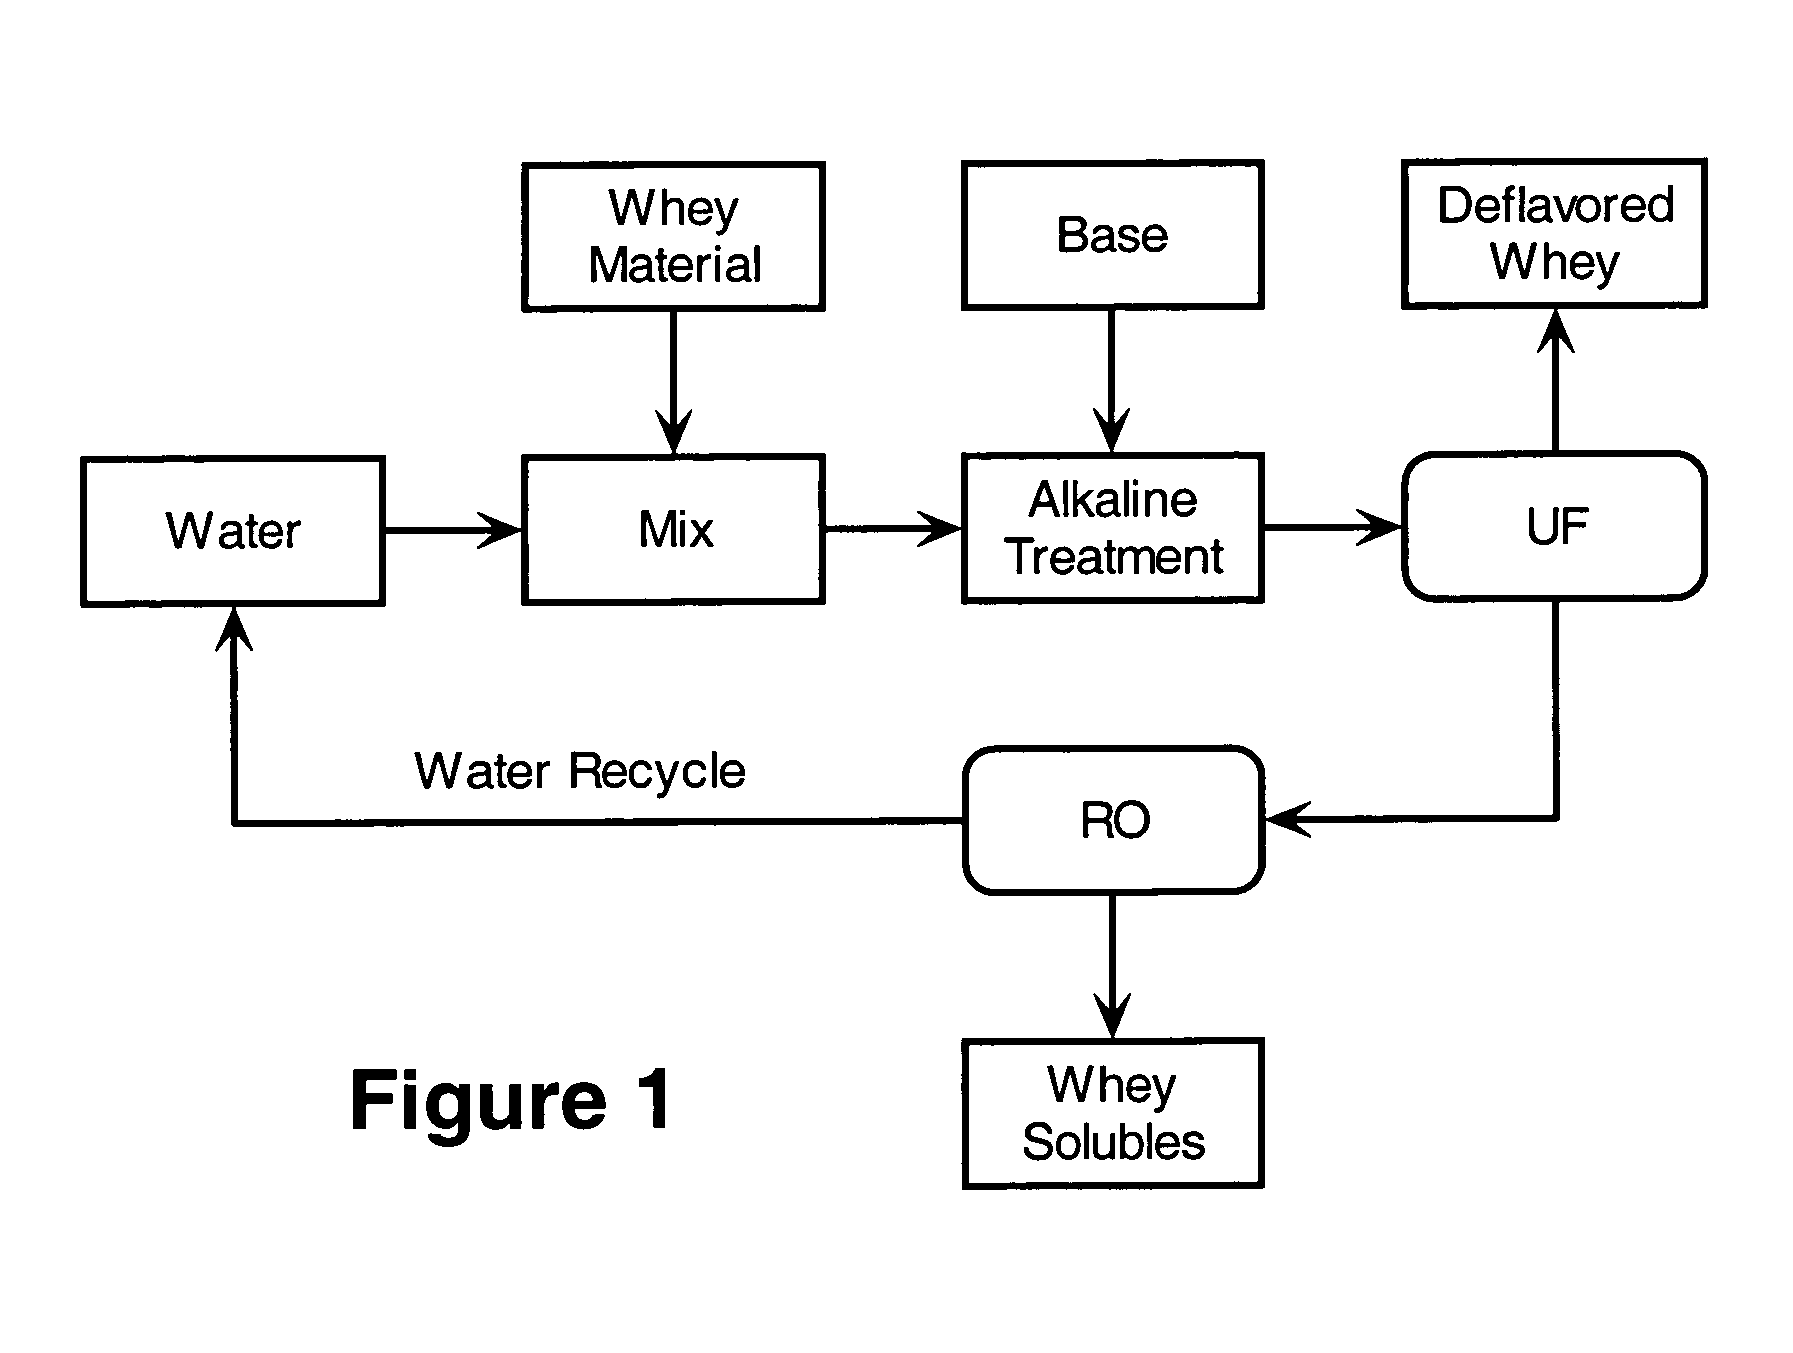 Method of deflavoring whey protein